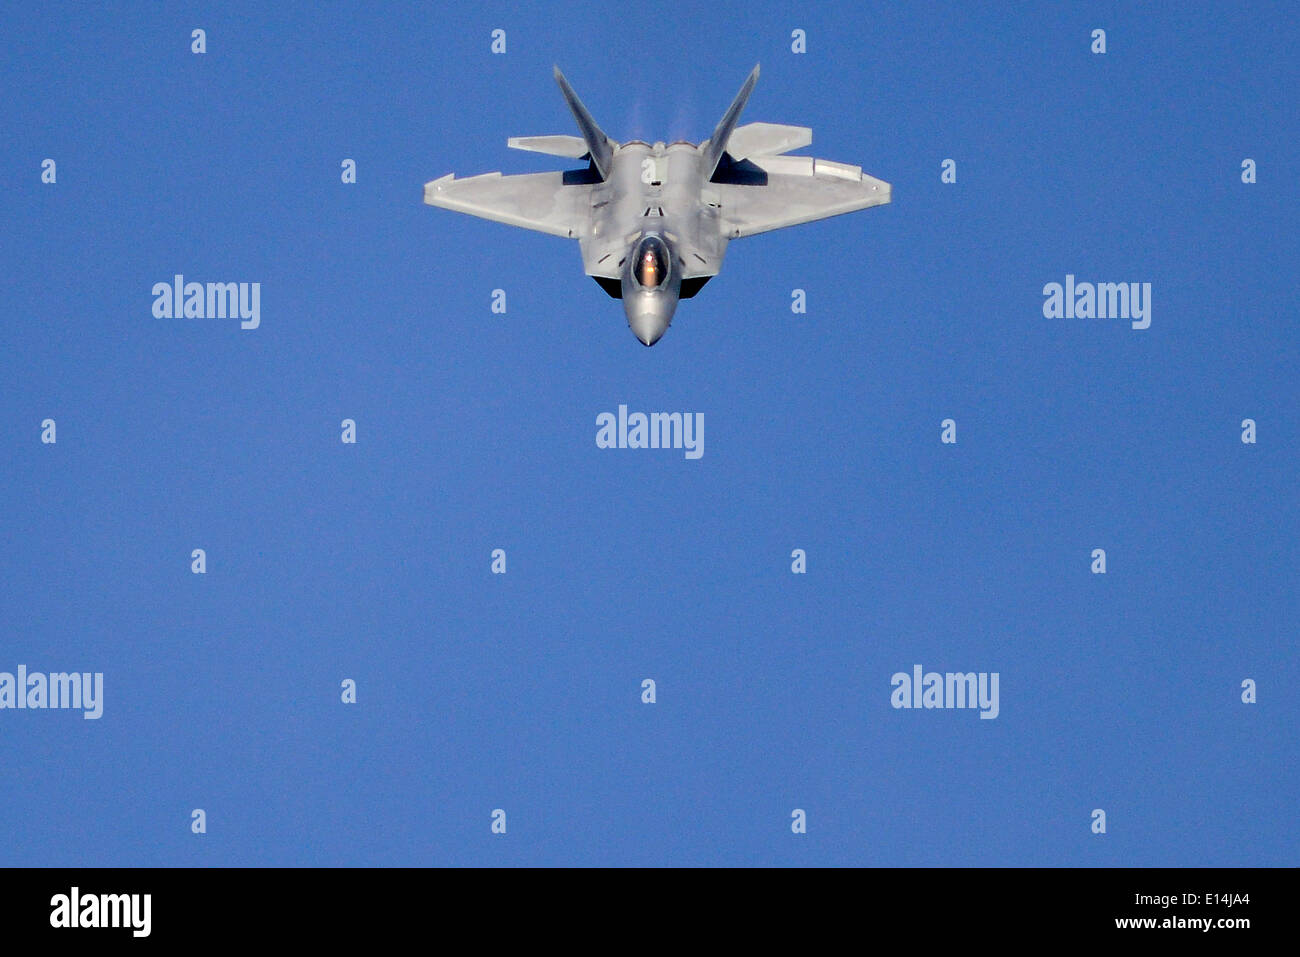 A US Air Force F-22 Raptor stealth fighter aircraft during an aerial demonstration May 21, 2014 at Langley Air Force Base, Virginia. Stock Photo